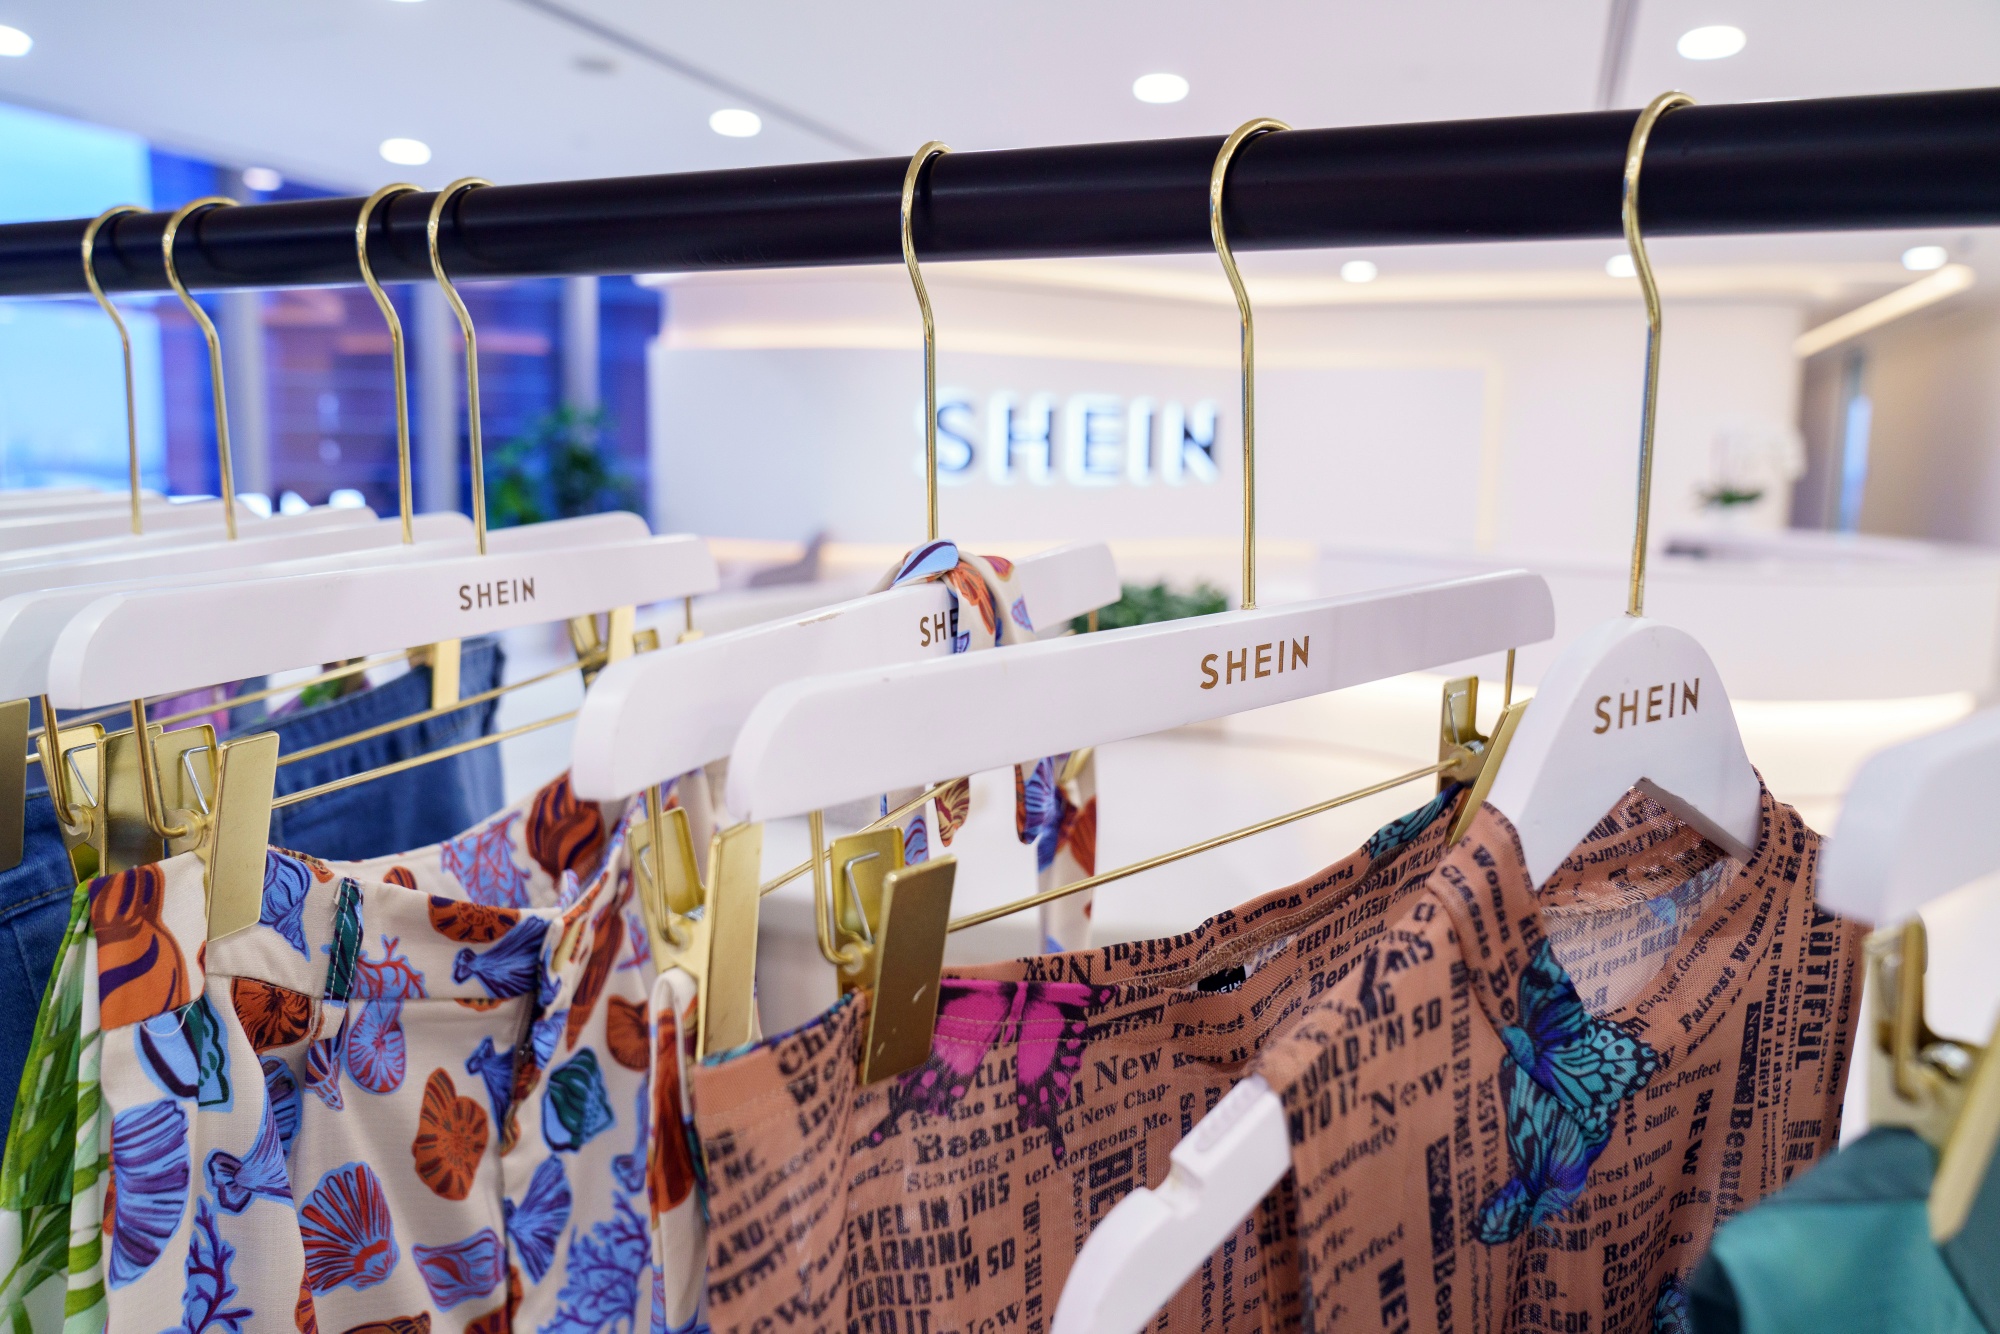 Is Fast Fashion Bad? The Climate Impact of Brands Like Shein - Bloomberg